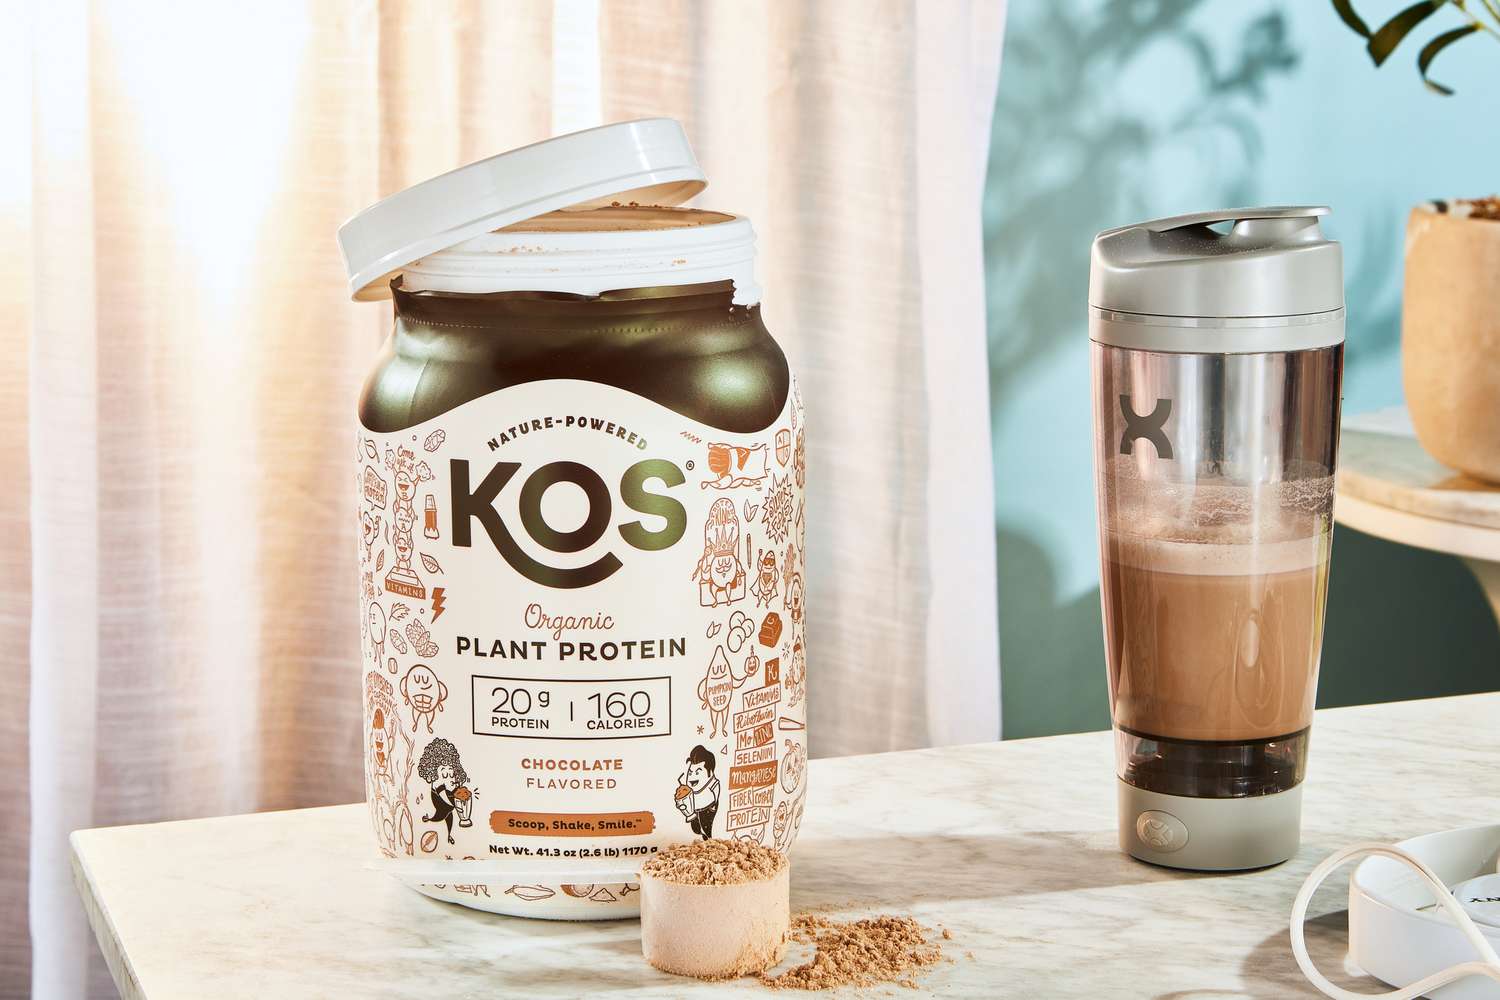 KOS Vegan Superfood Protein Powder bottle next to a scoop and shaker